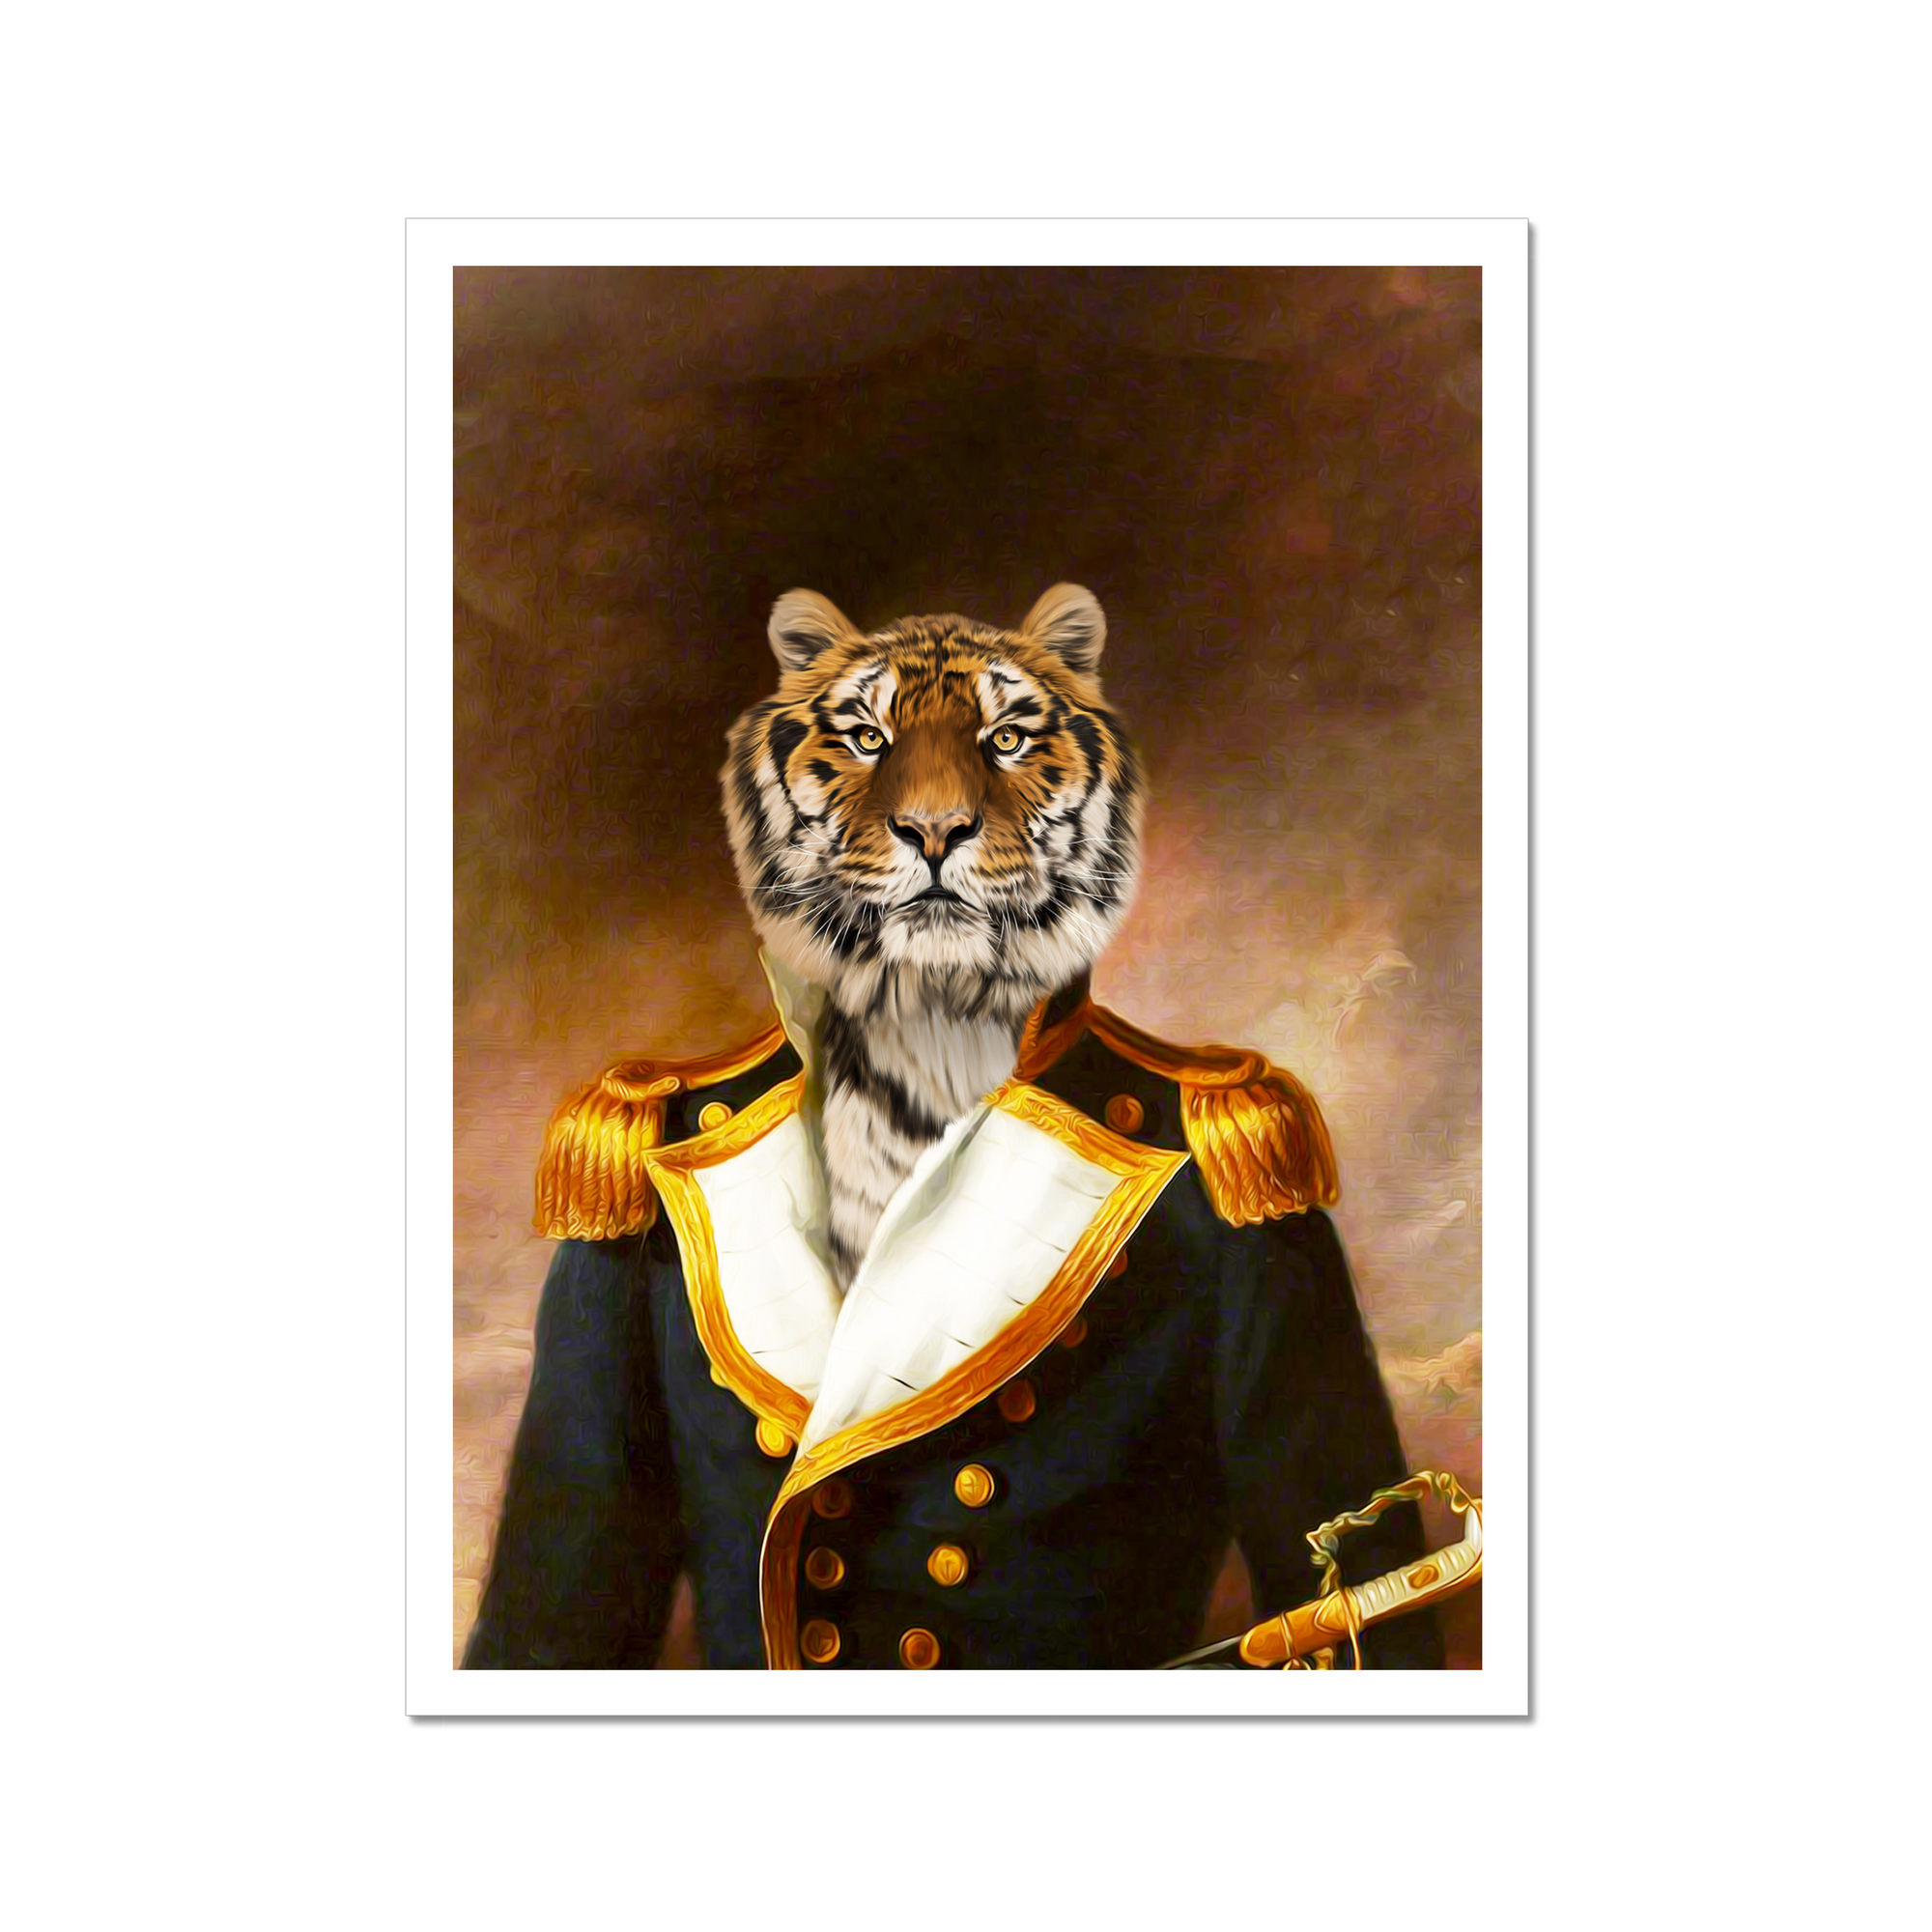 Paw & Glory, paw and glory, admiral pet portrait, paintings of pets from photos, funny dog paintings, painting of your dog, best dog artists, draw your pet portrait, pet portrait